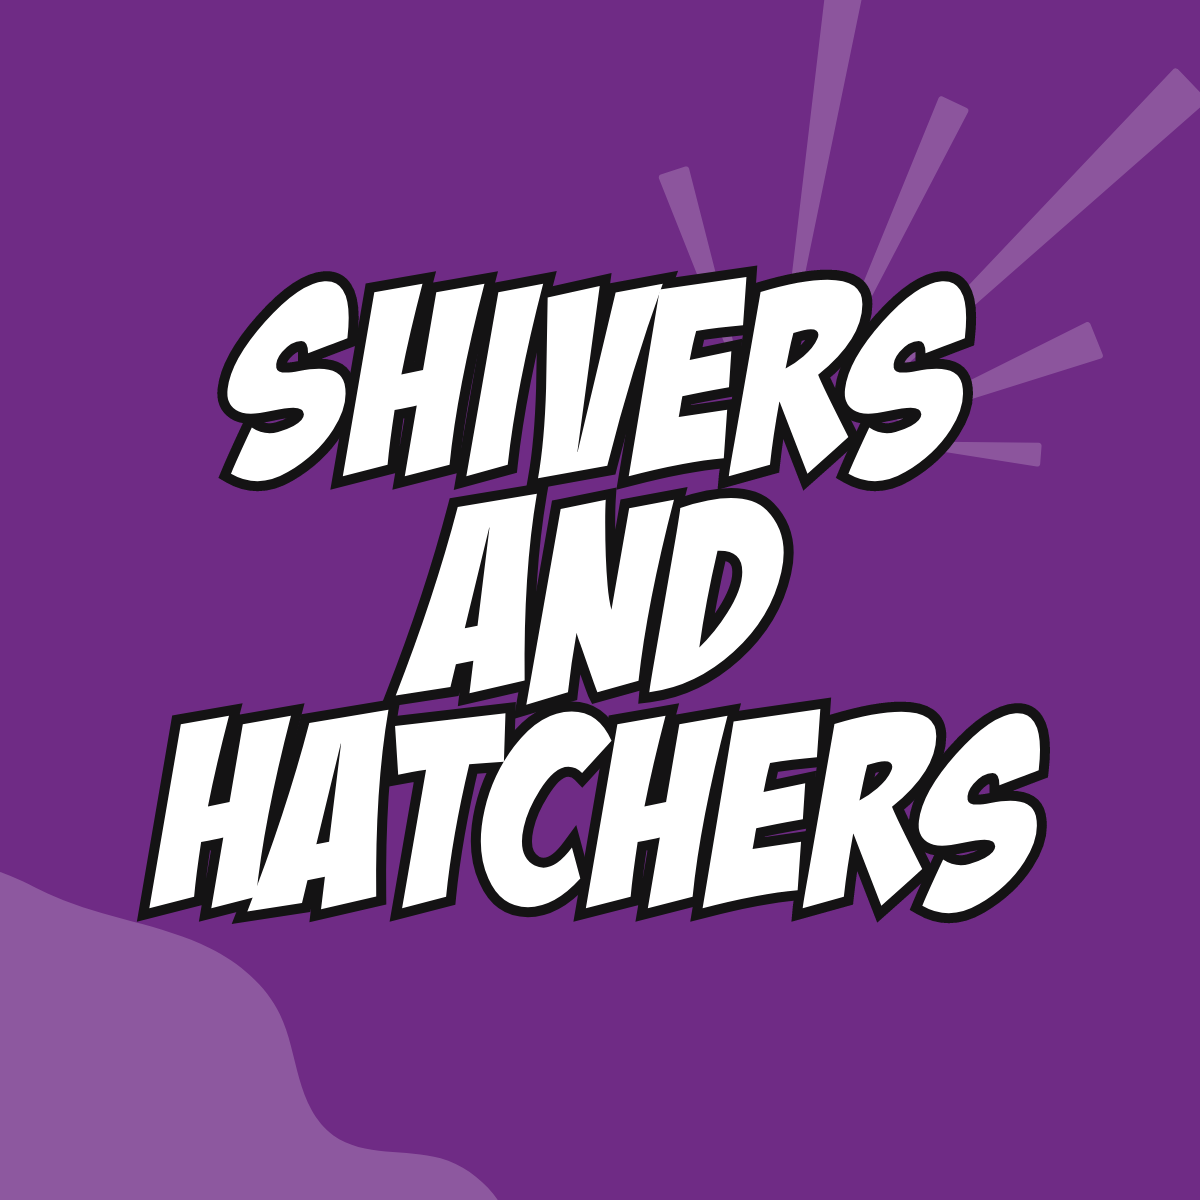 Shivers and Hatcher